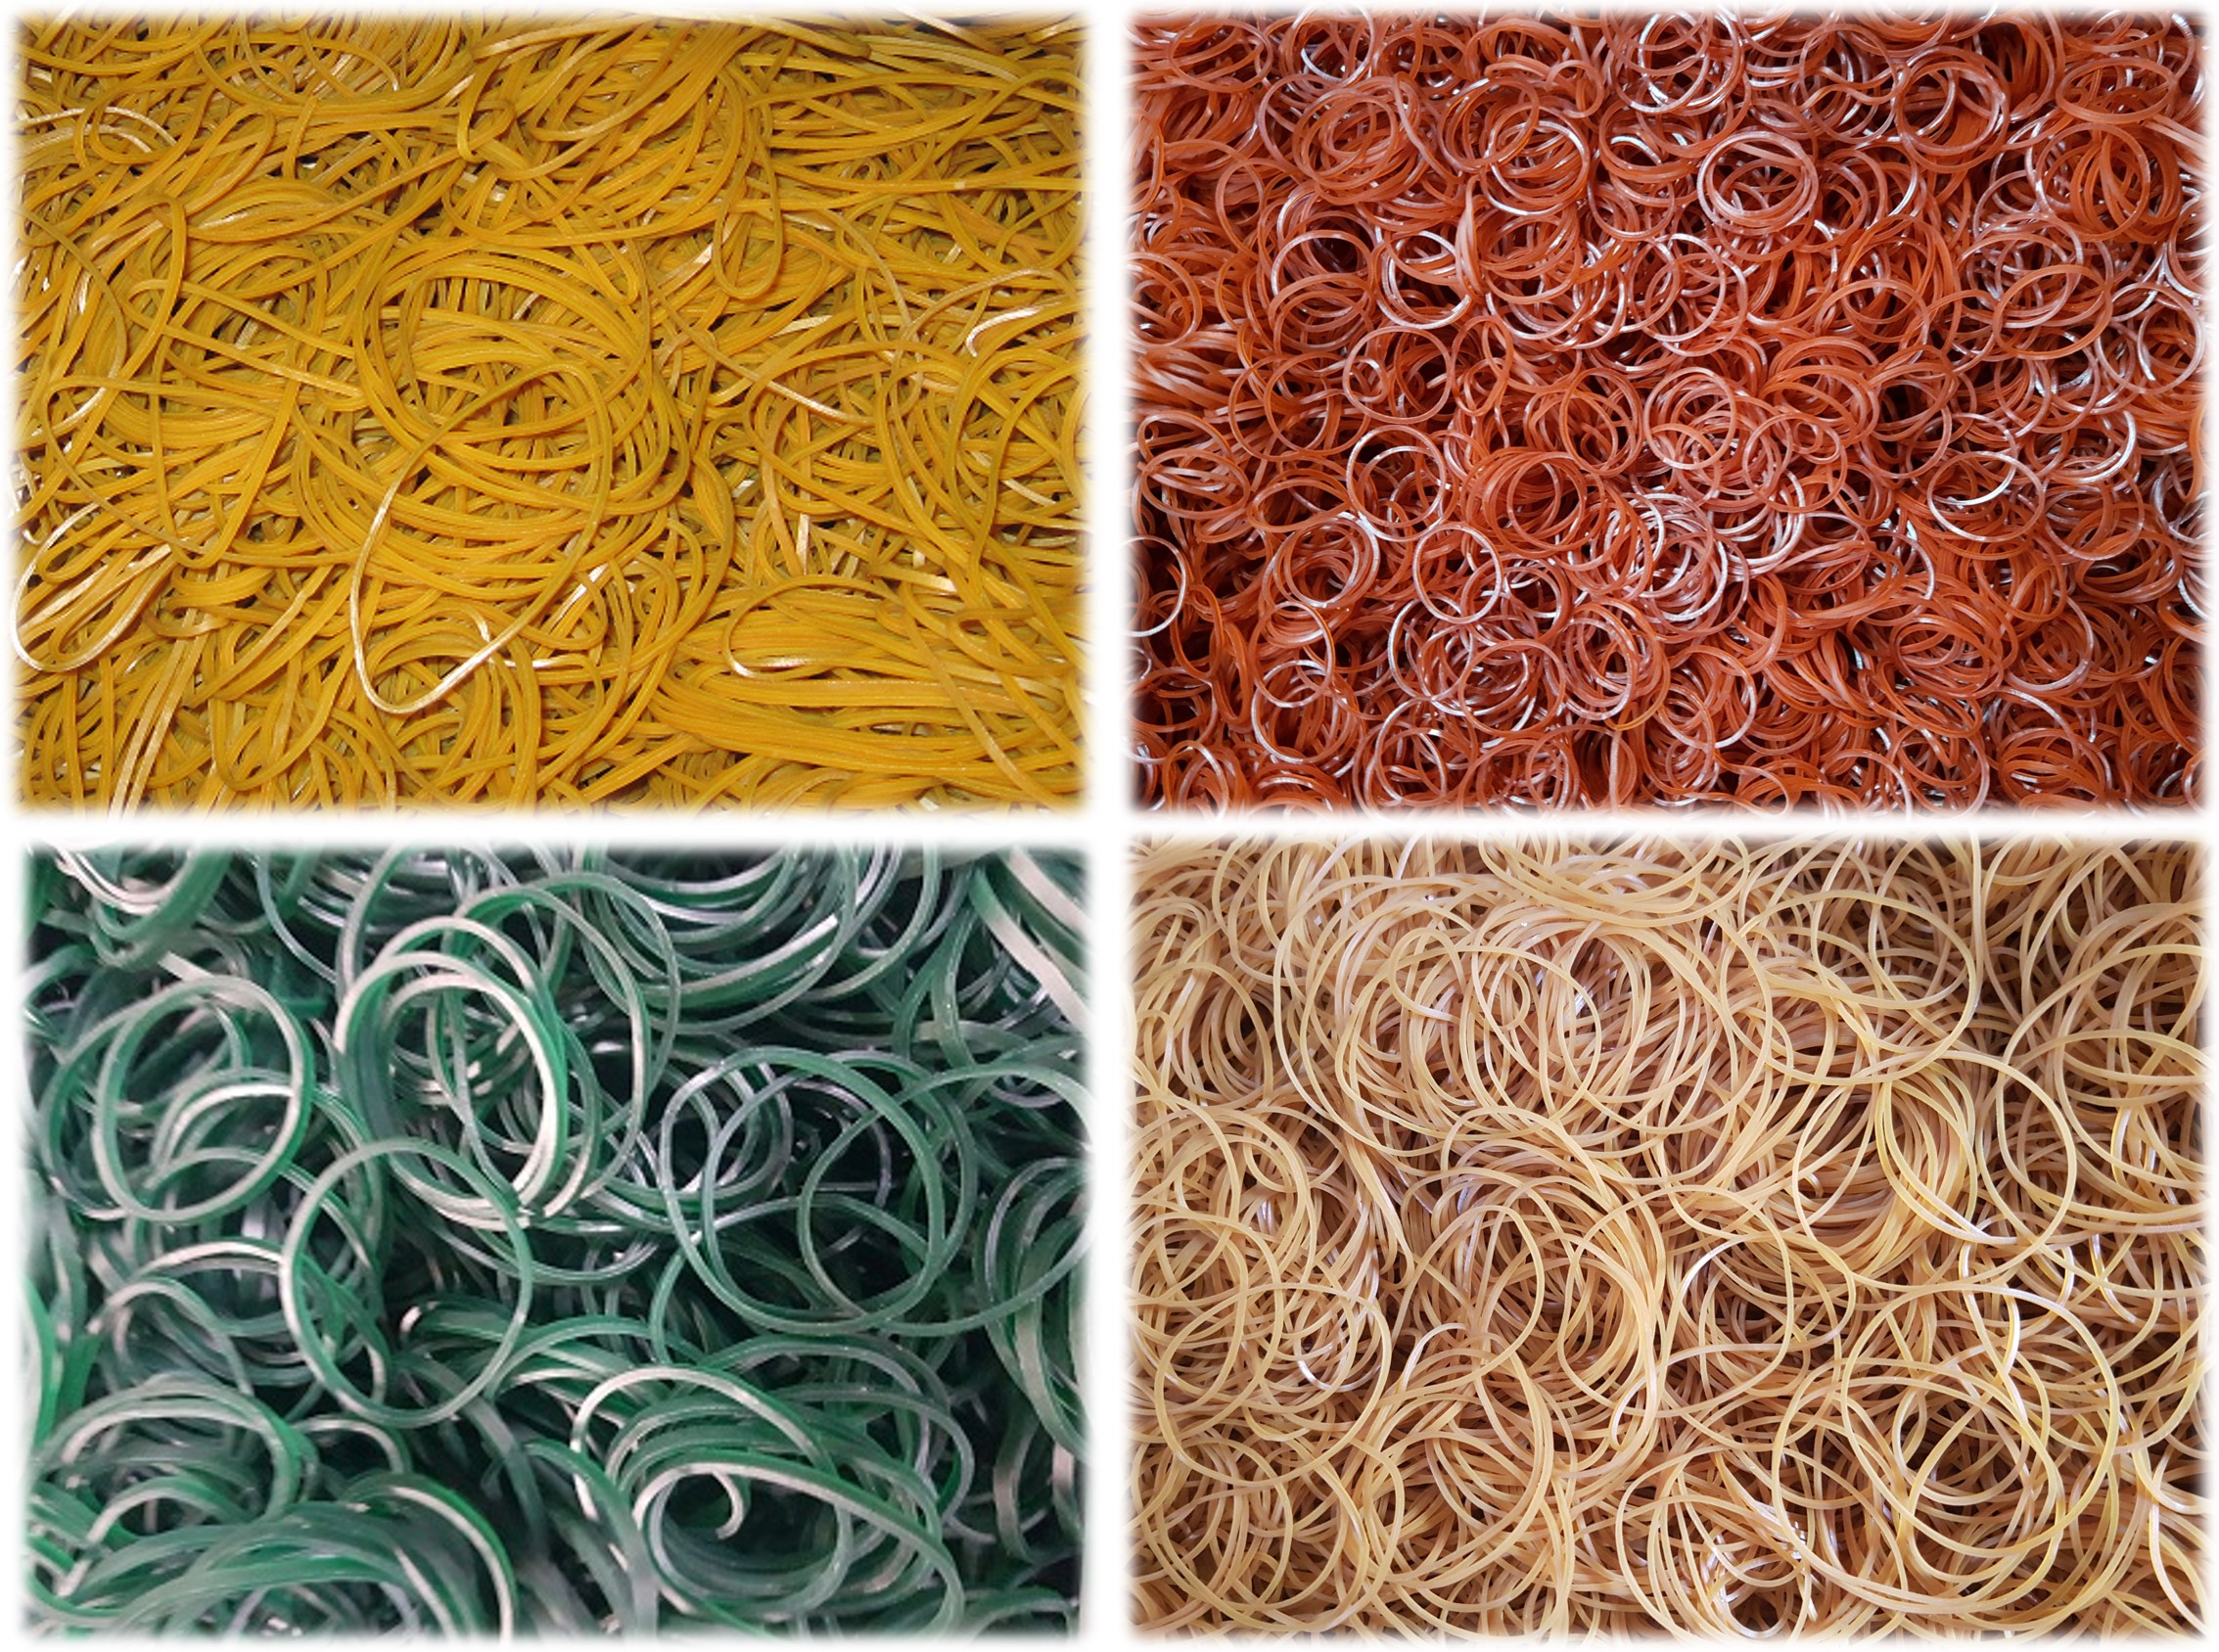 rubber bands, natural rubber bands, crepe rubber bands, rubber band